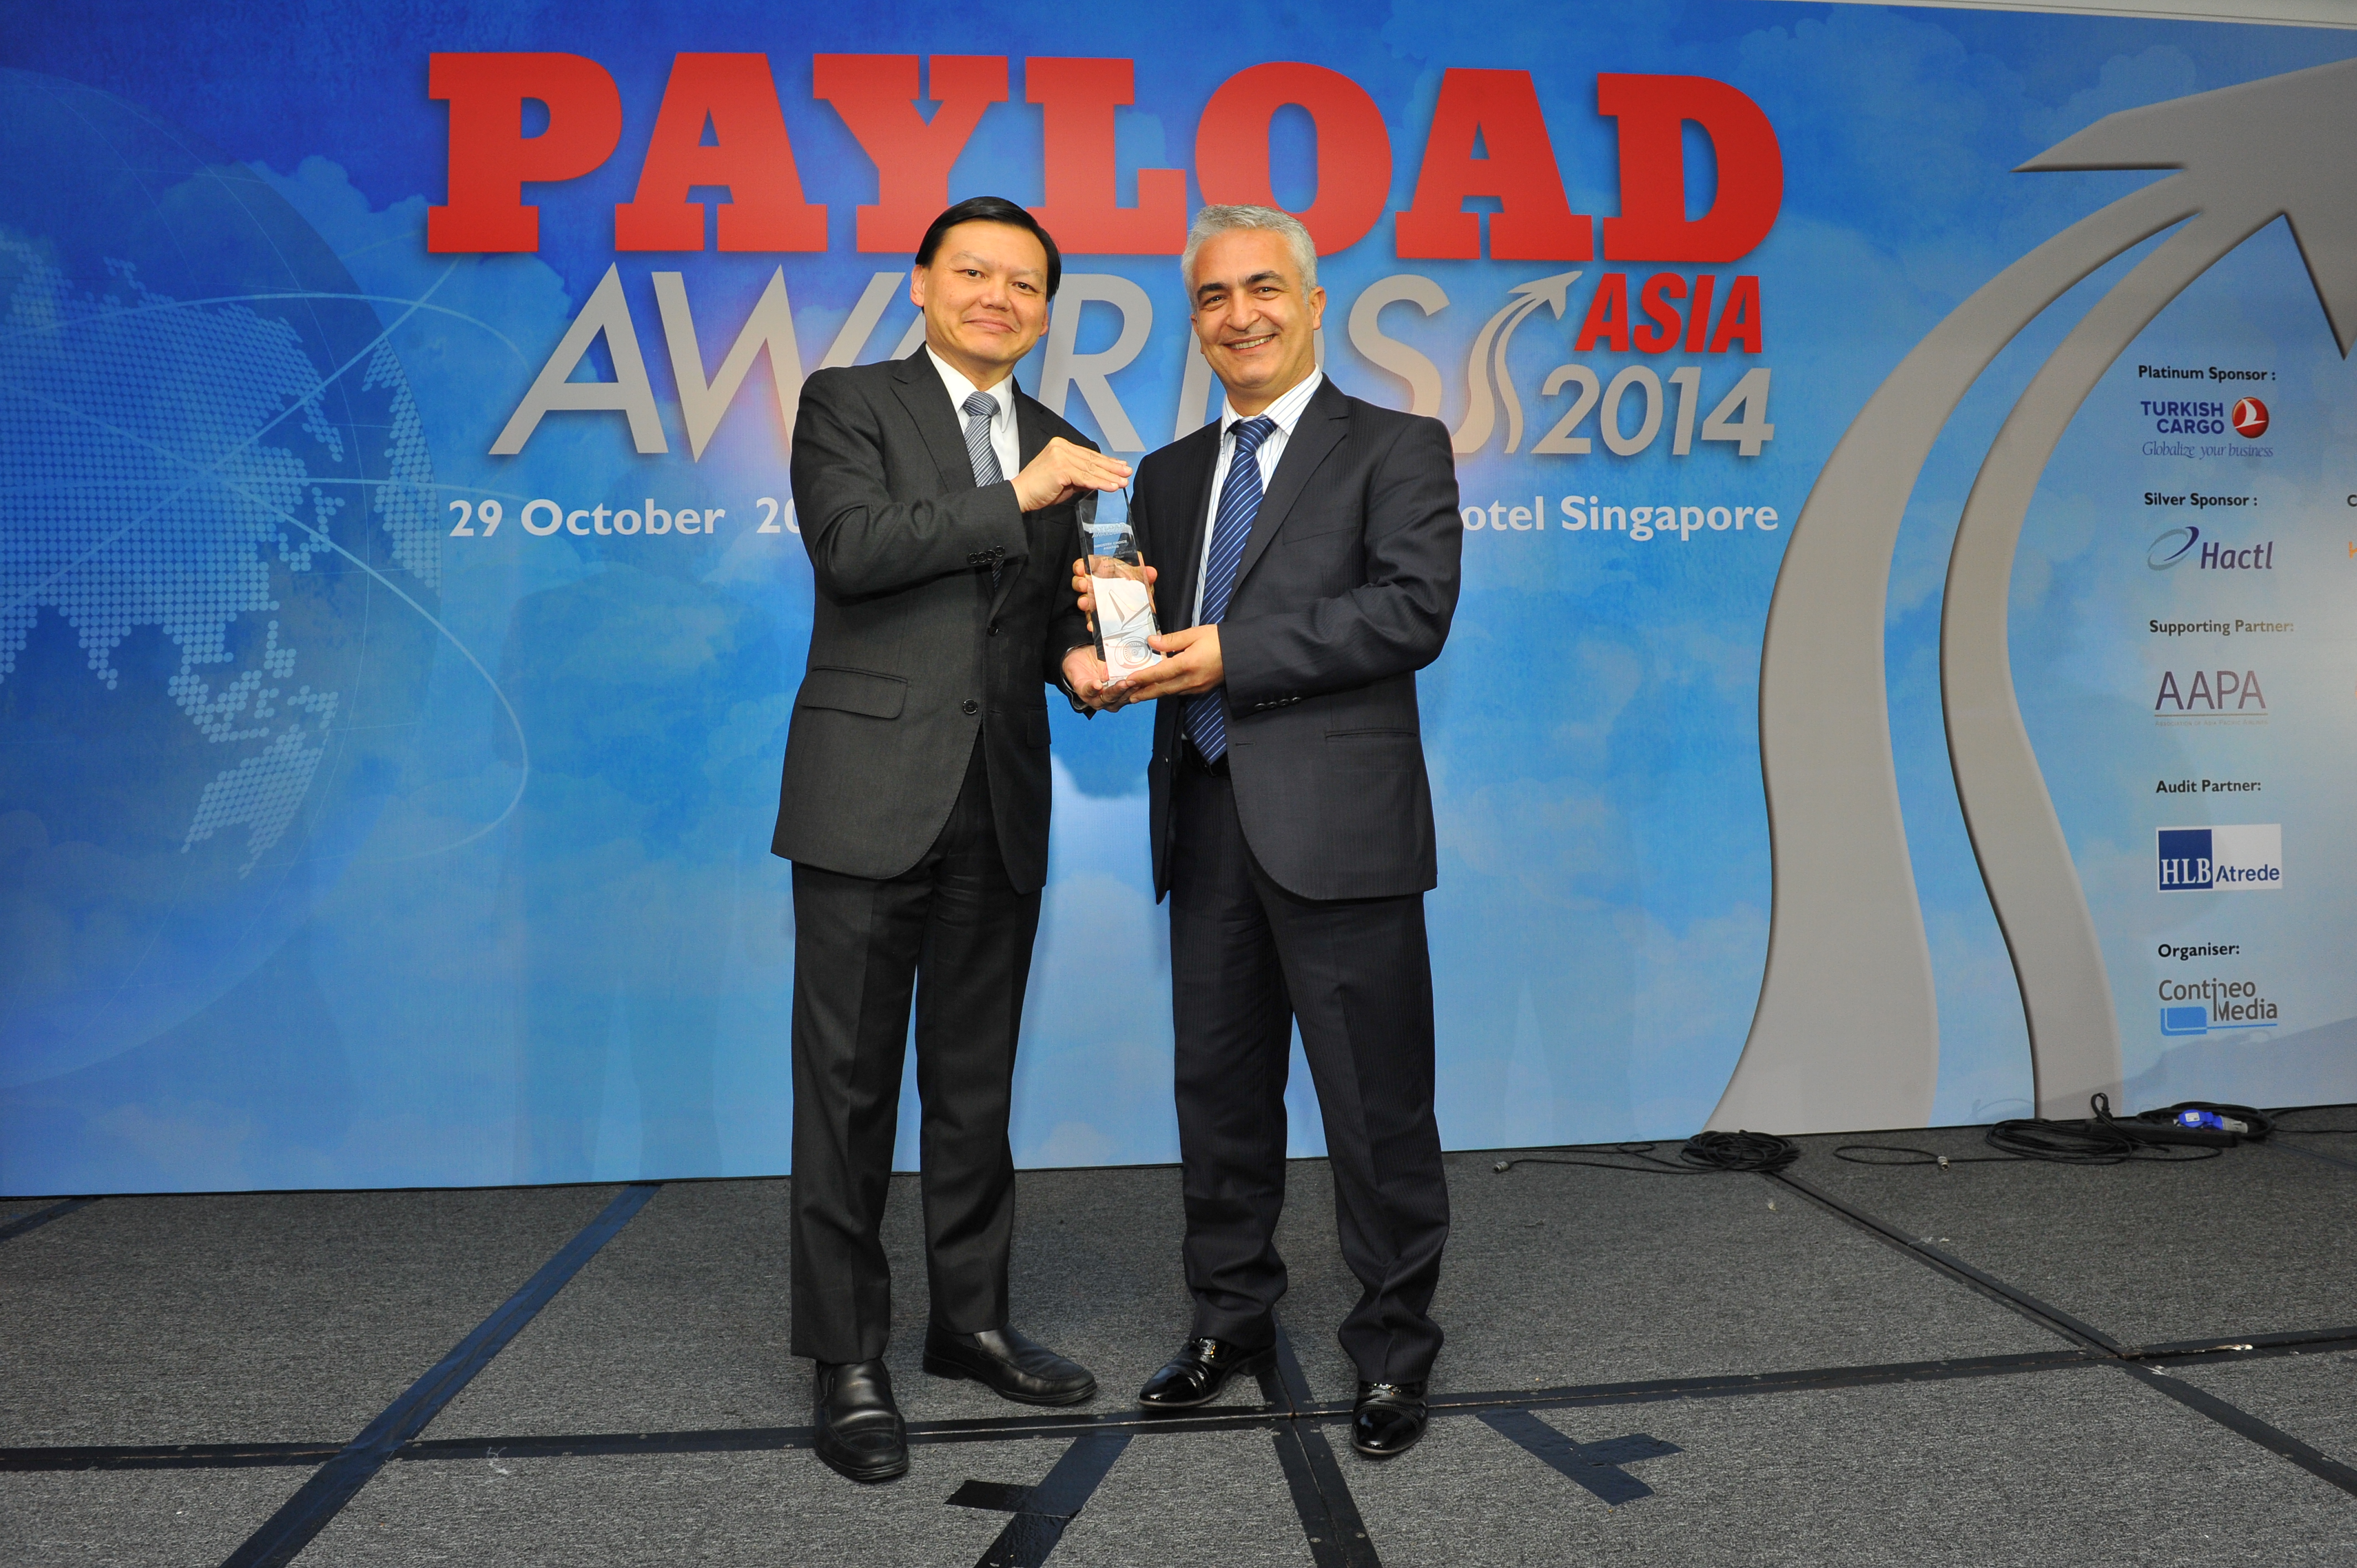 Turkish Cargo named “Overall Carrier of the Year” and “Combination Carrier of the Year” at Payload Asia Awards 2014.   